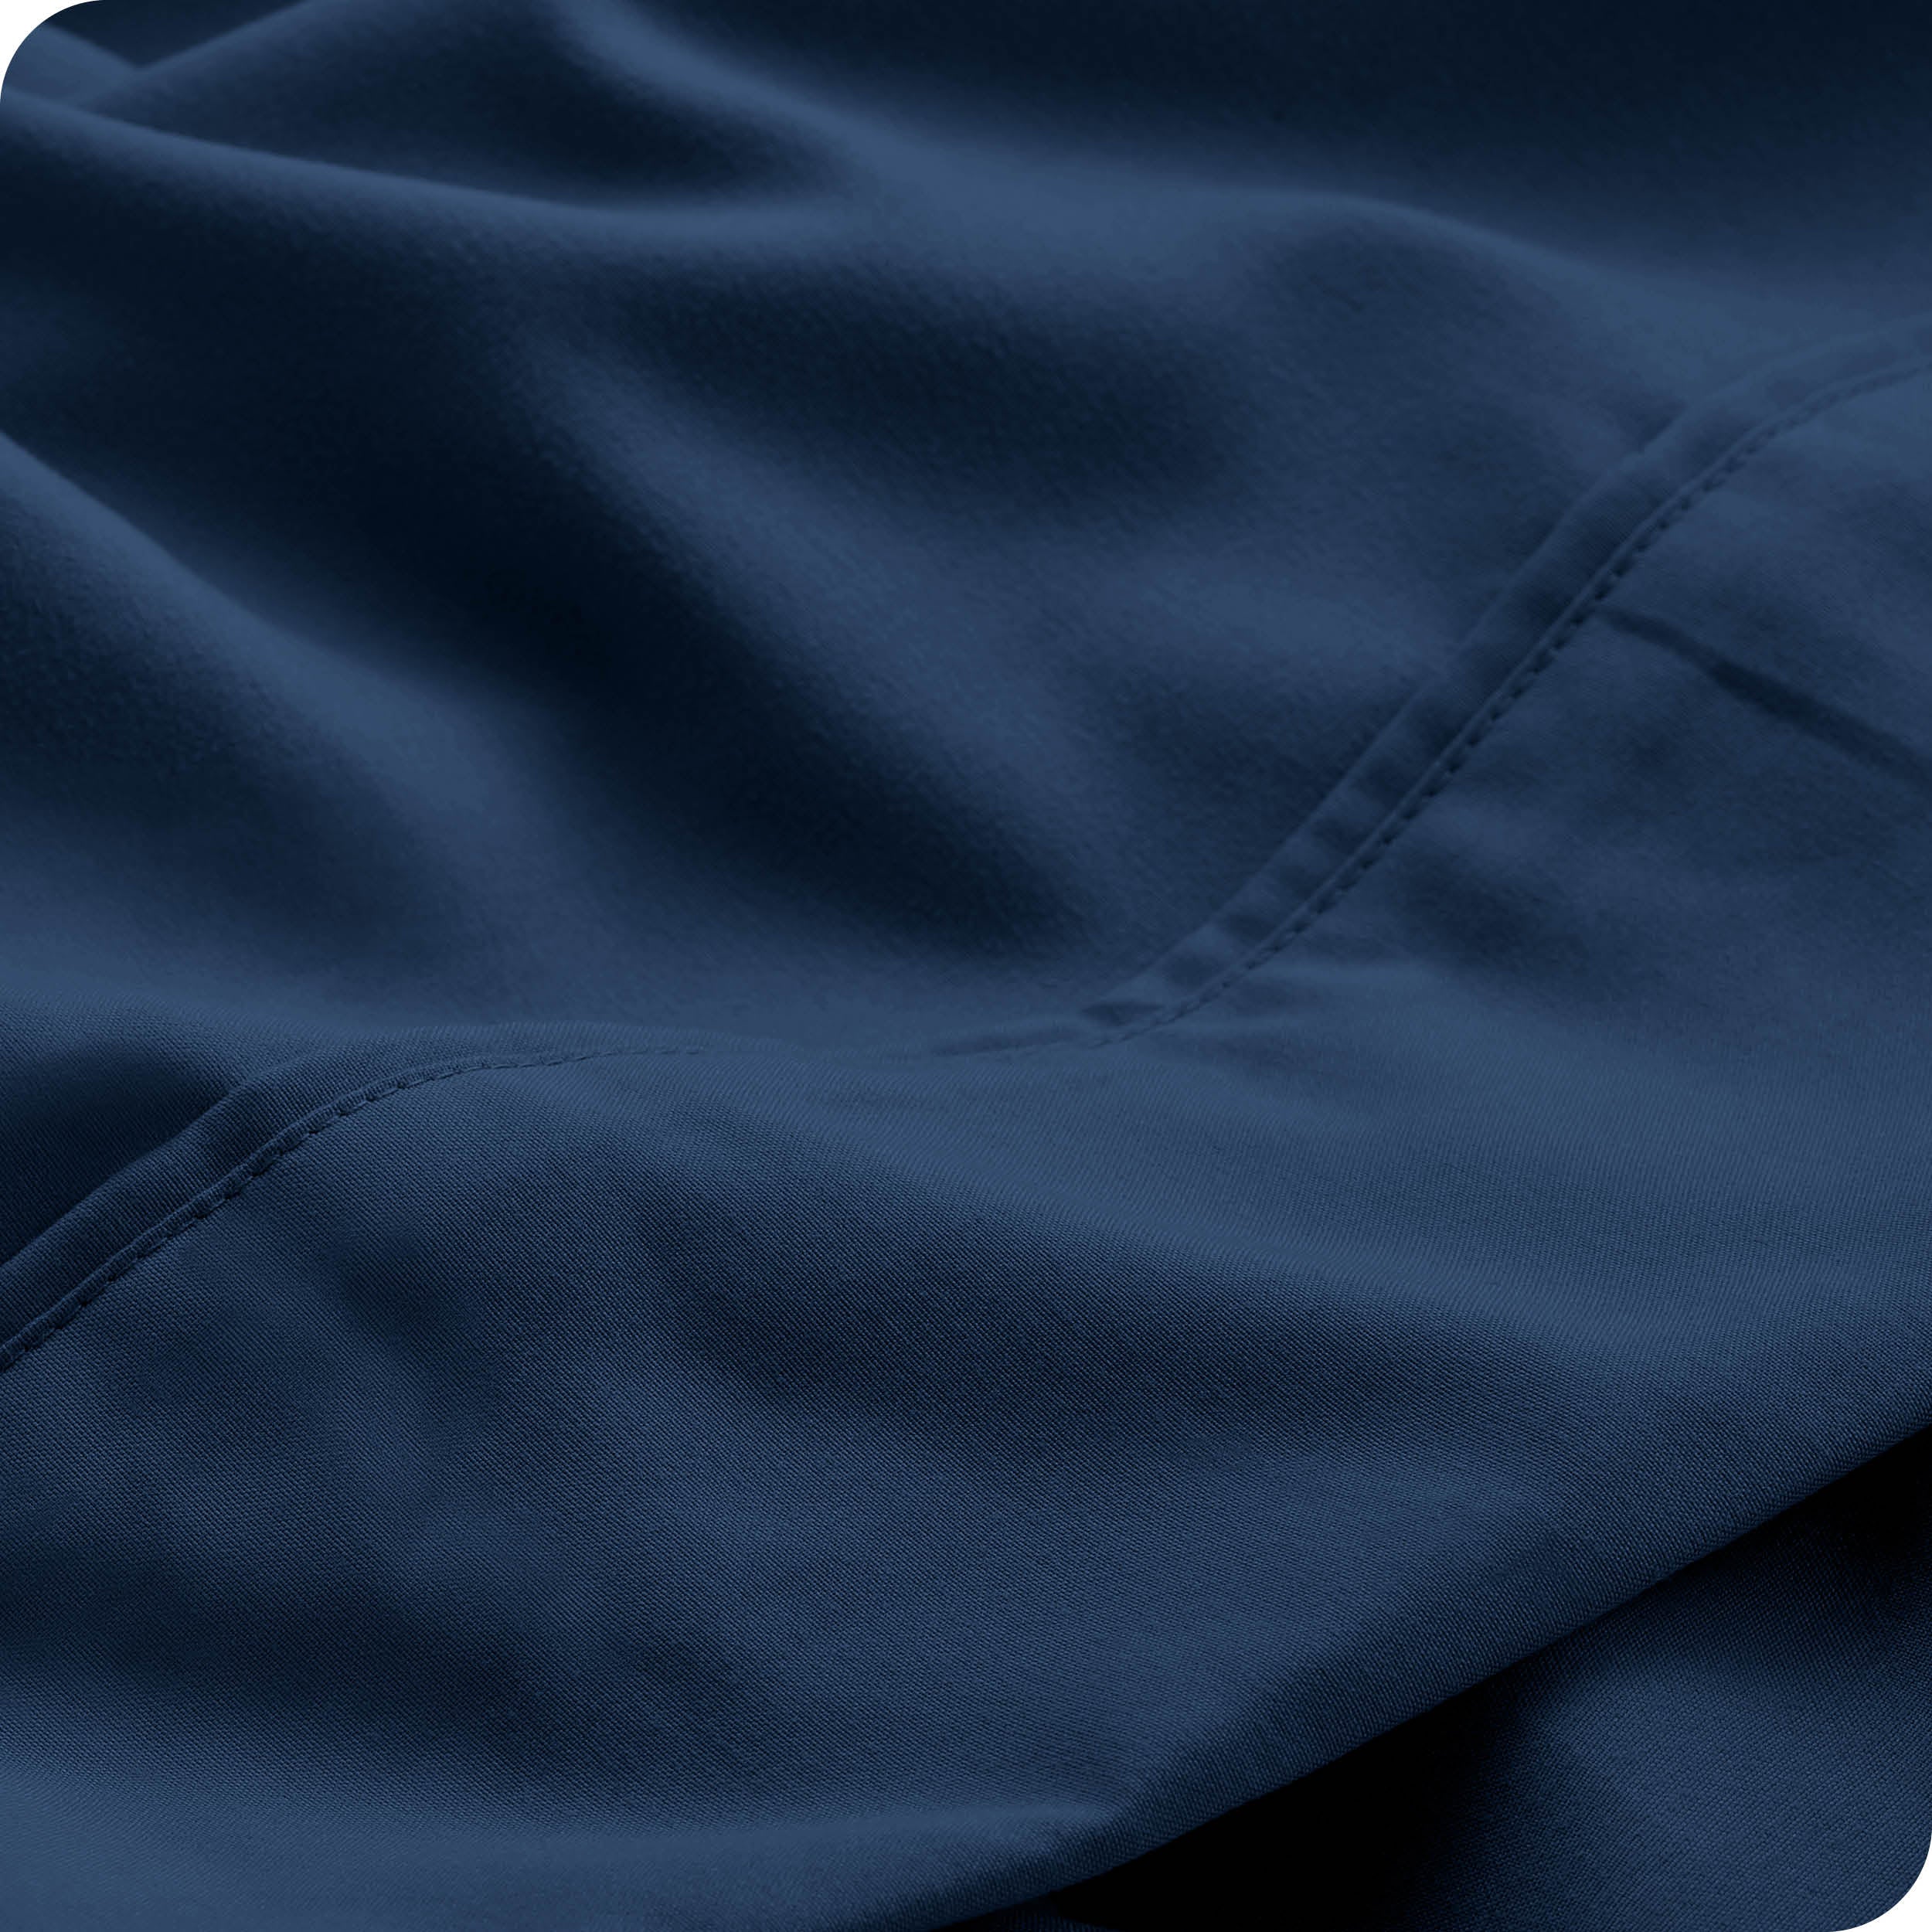 Close up of a dark blue microfiber sheet showing the stitching and texture